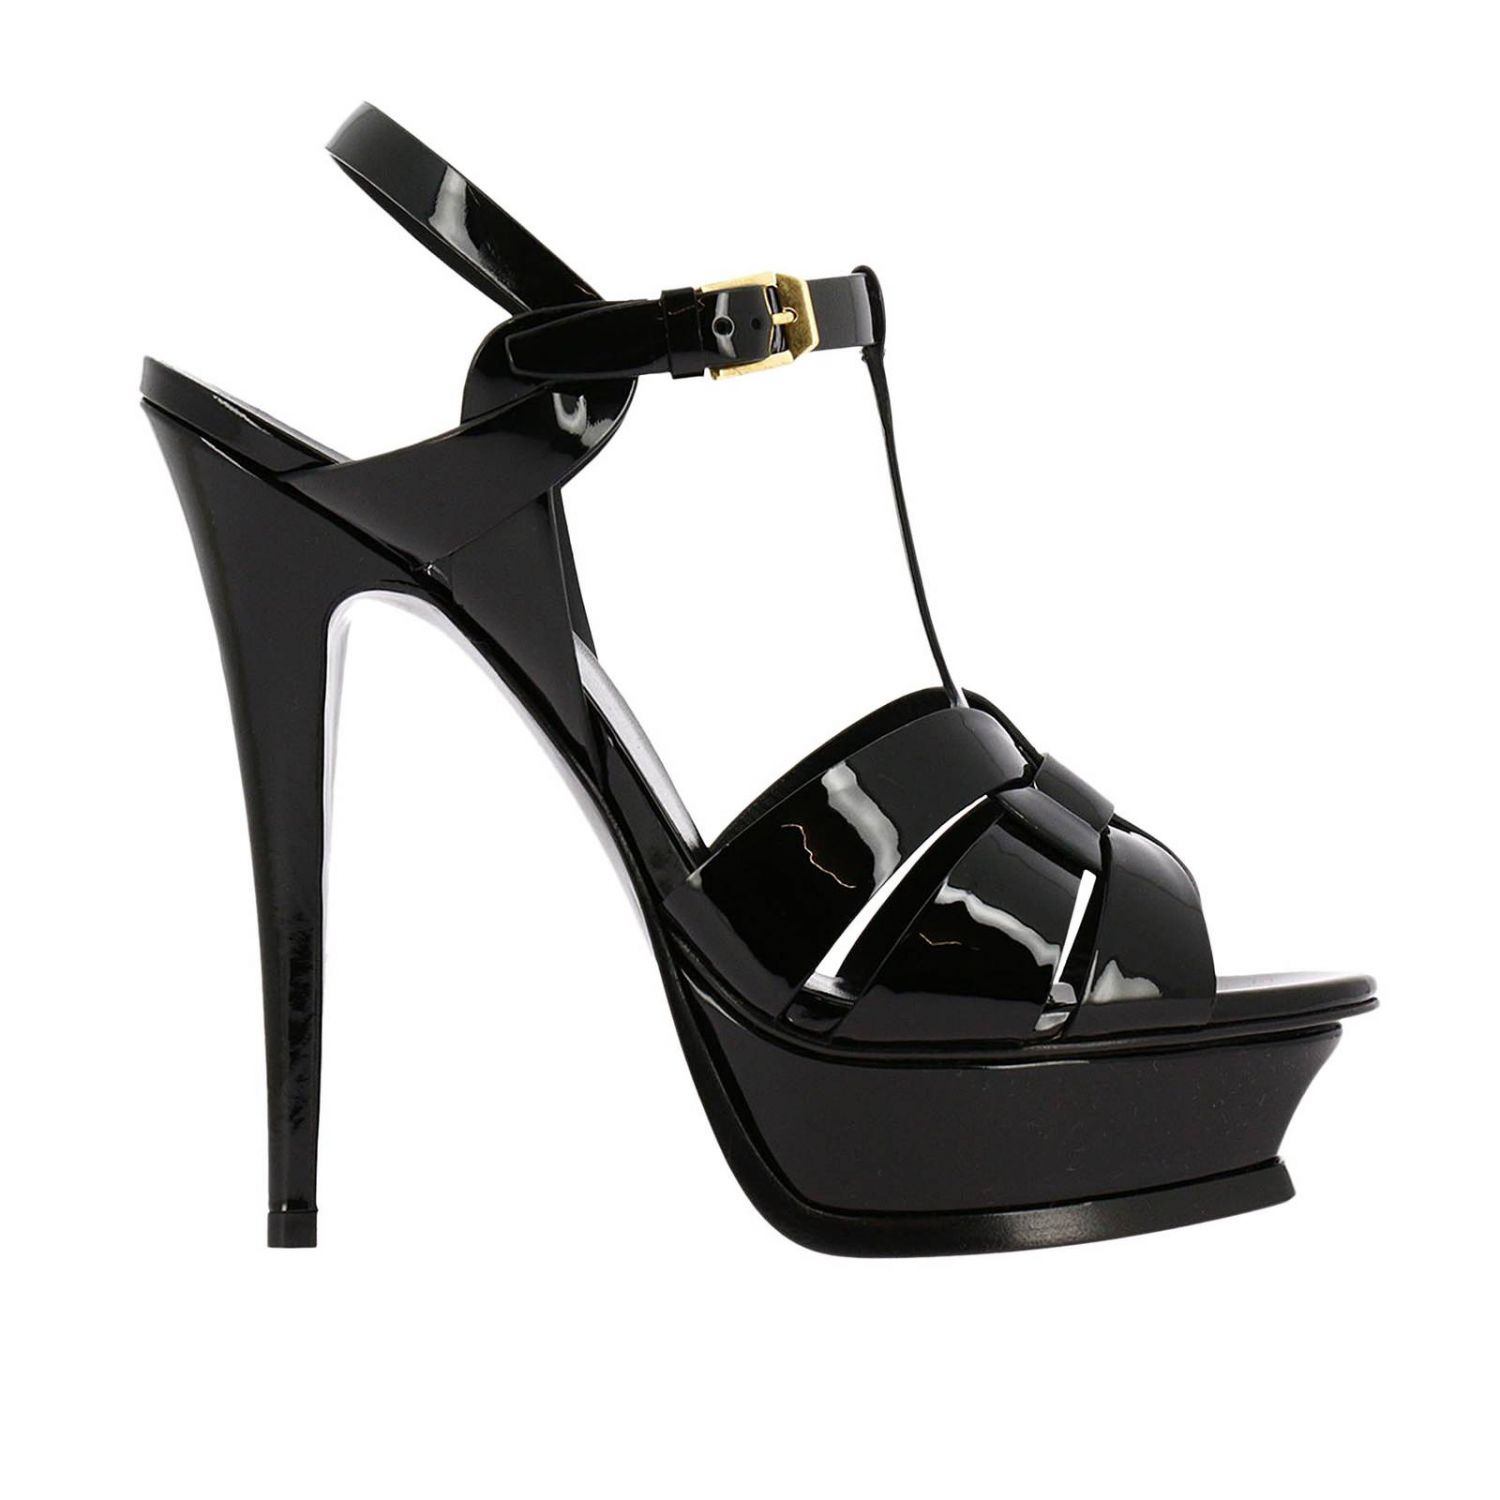 SAINT LAURENT: YSL Tribute sandal Classic in patent leather with ...